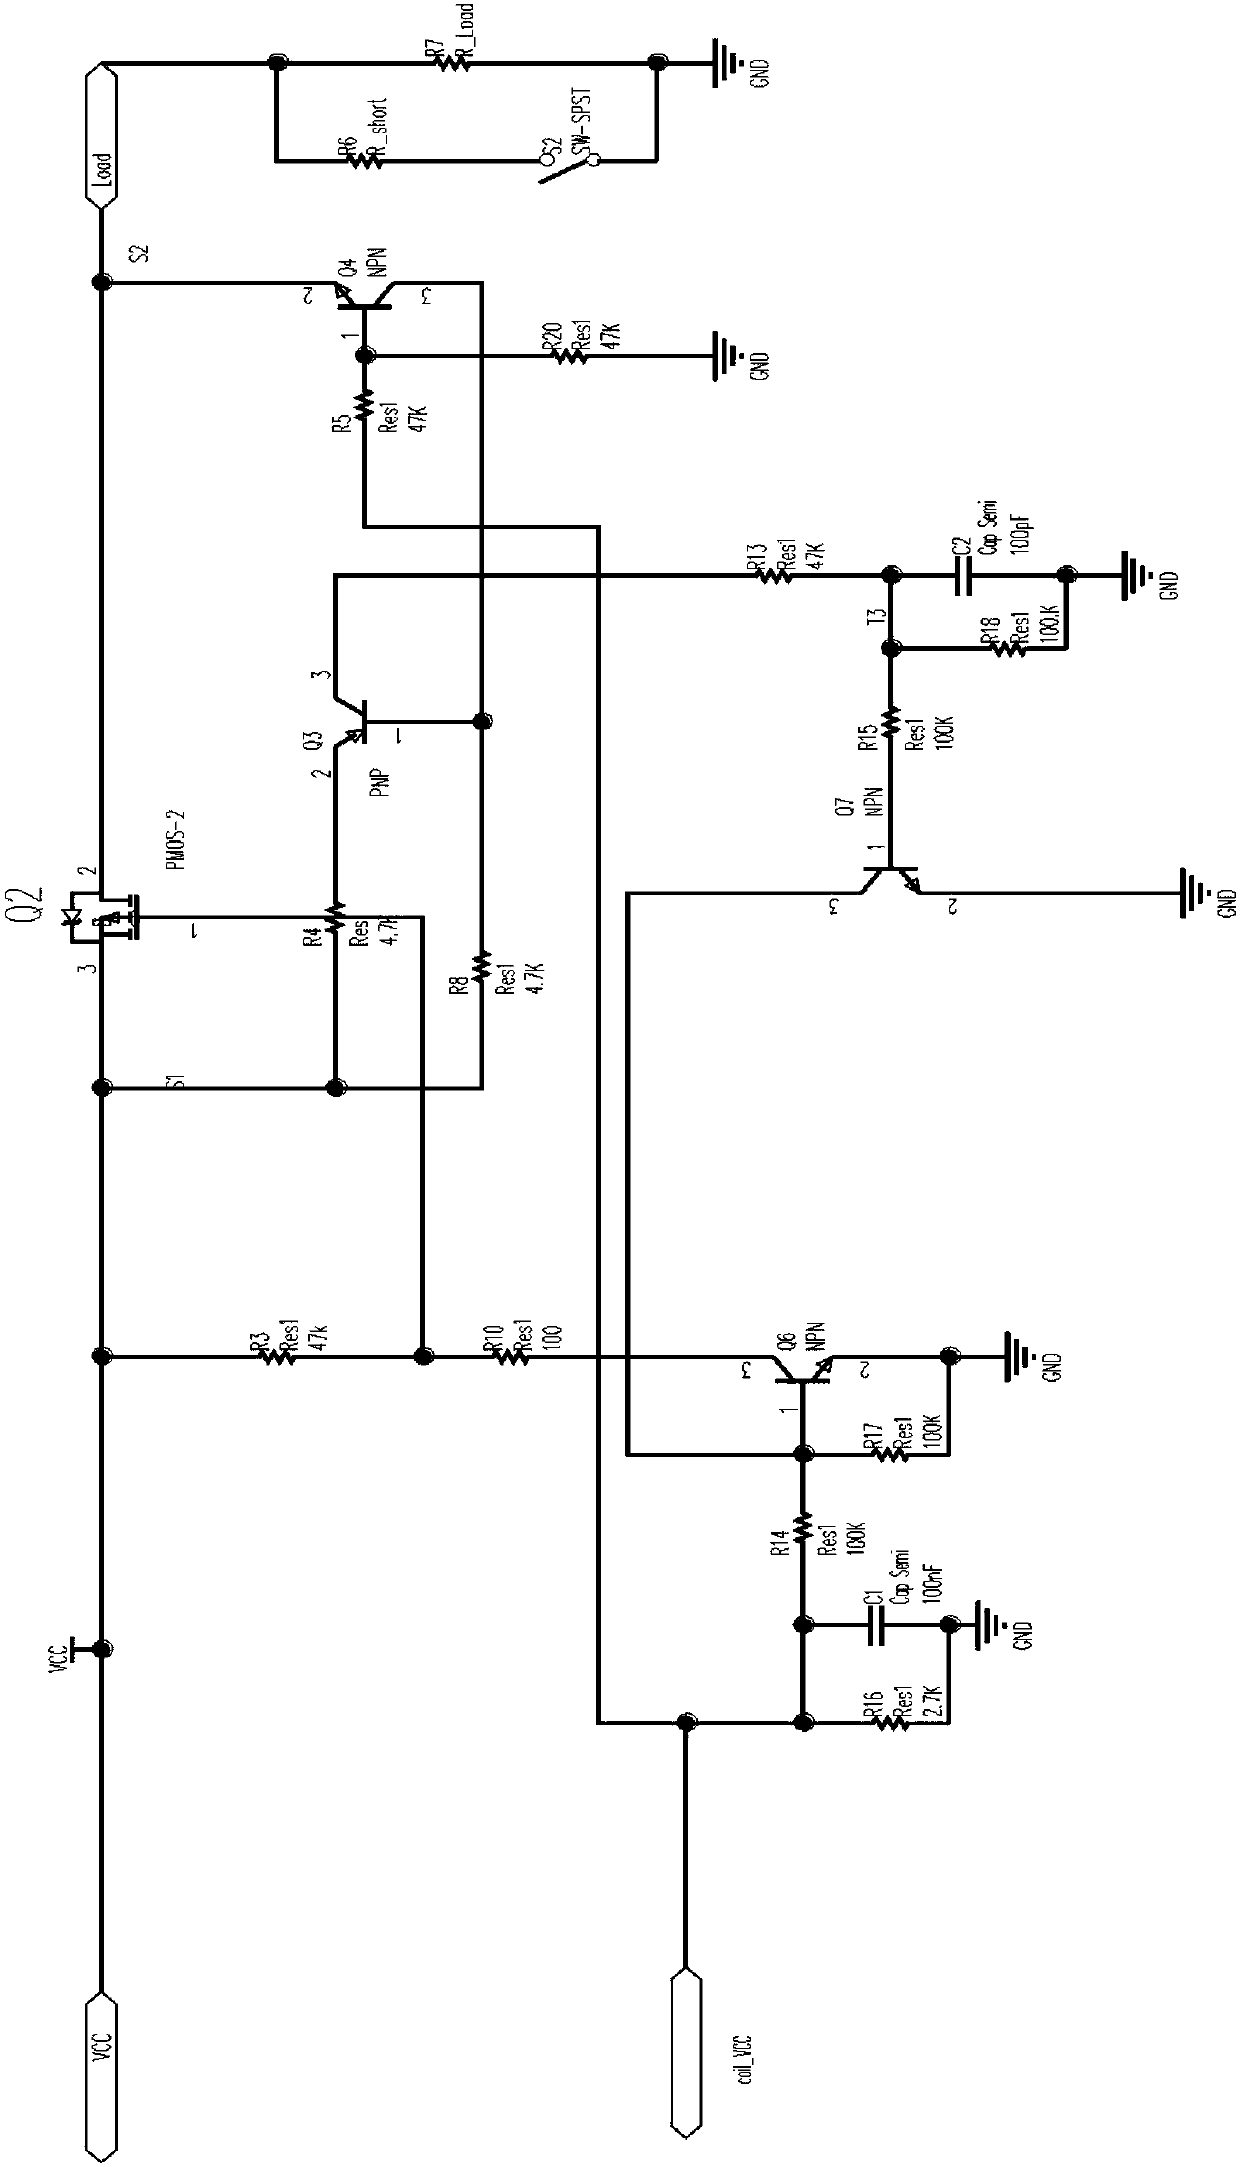 Automotive solid-state relay with PMOS tube and over-current protection